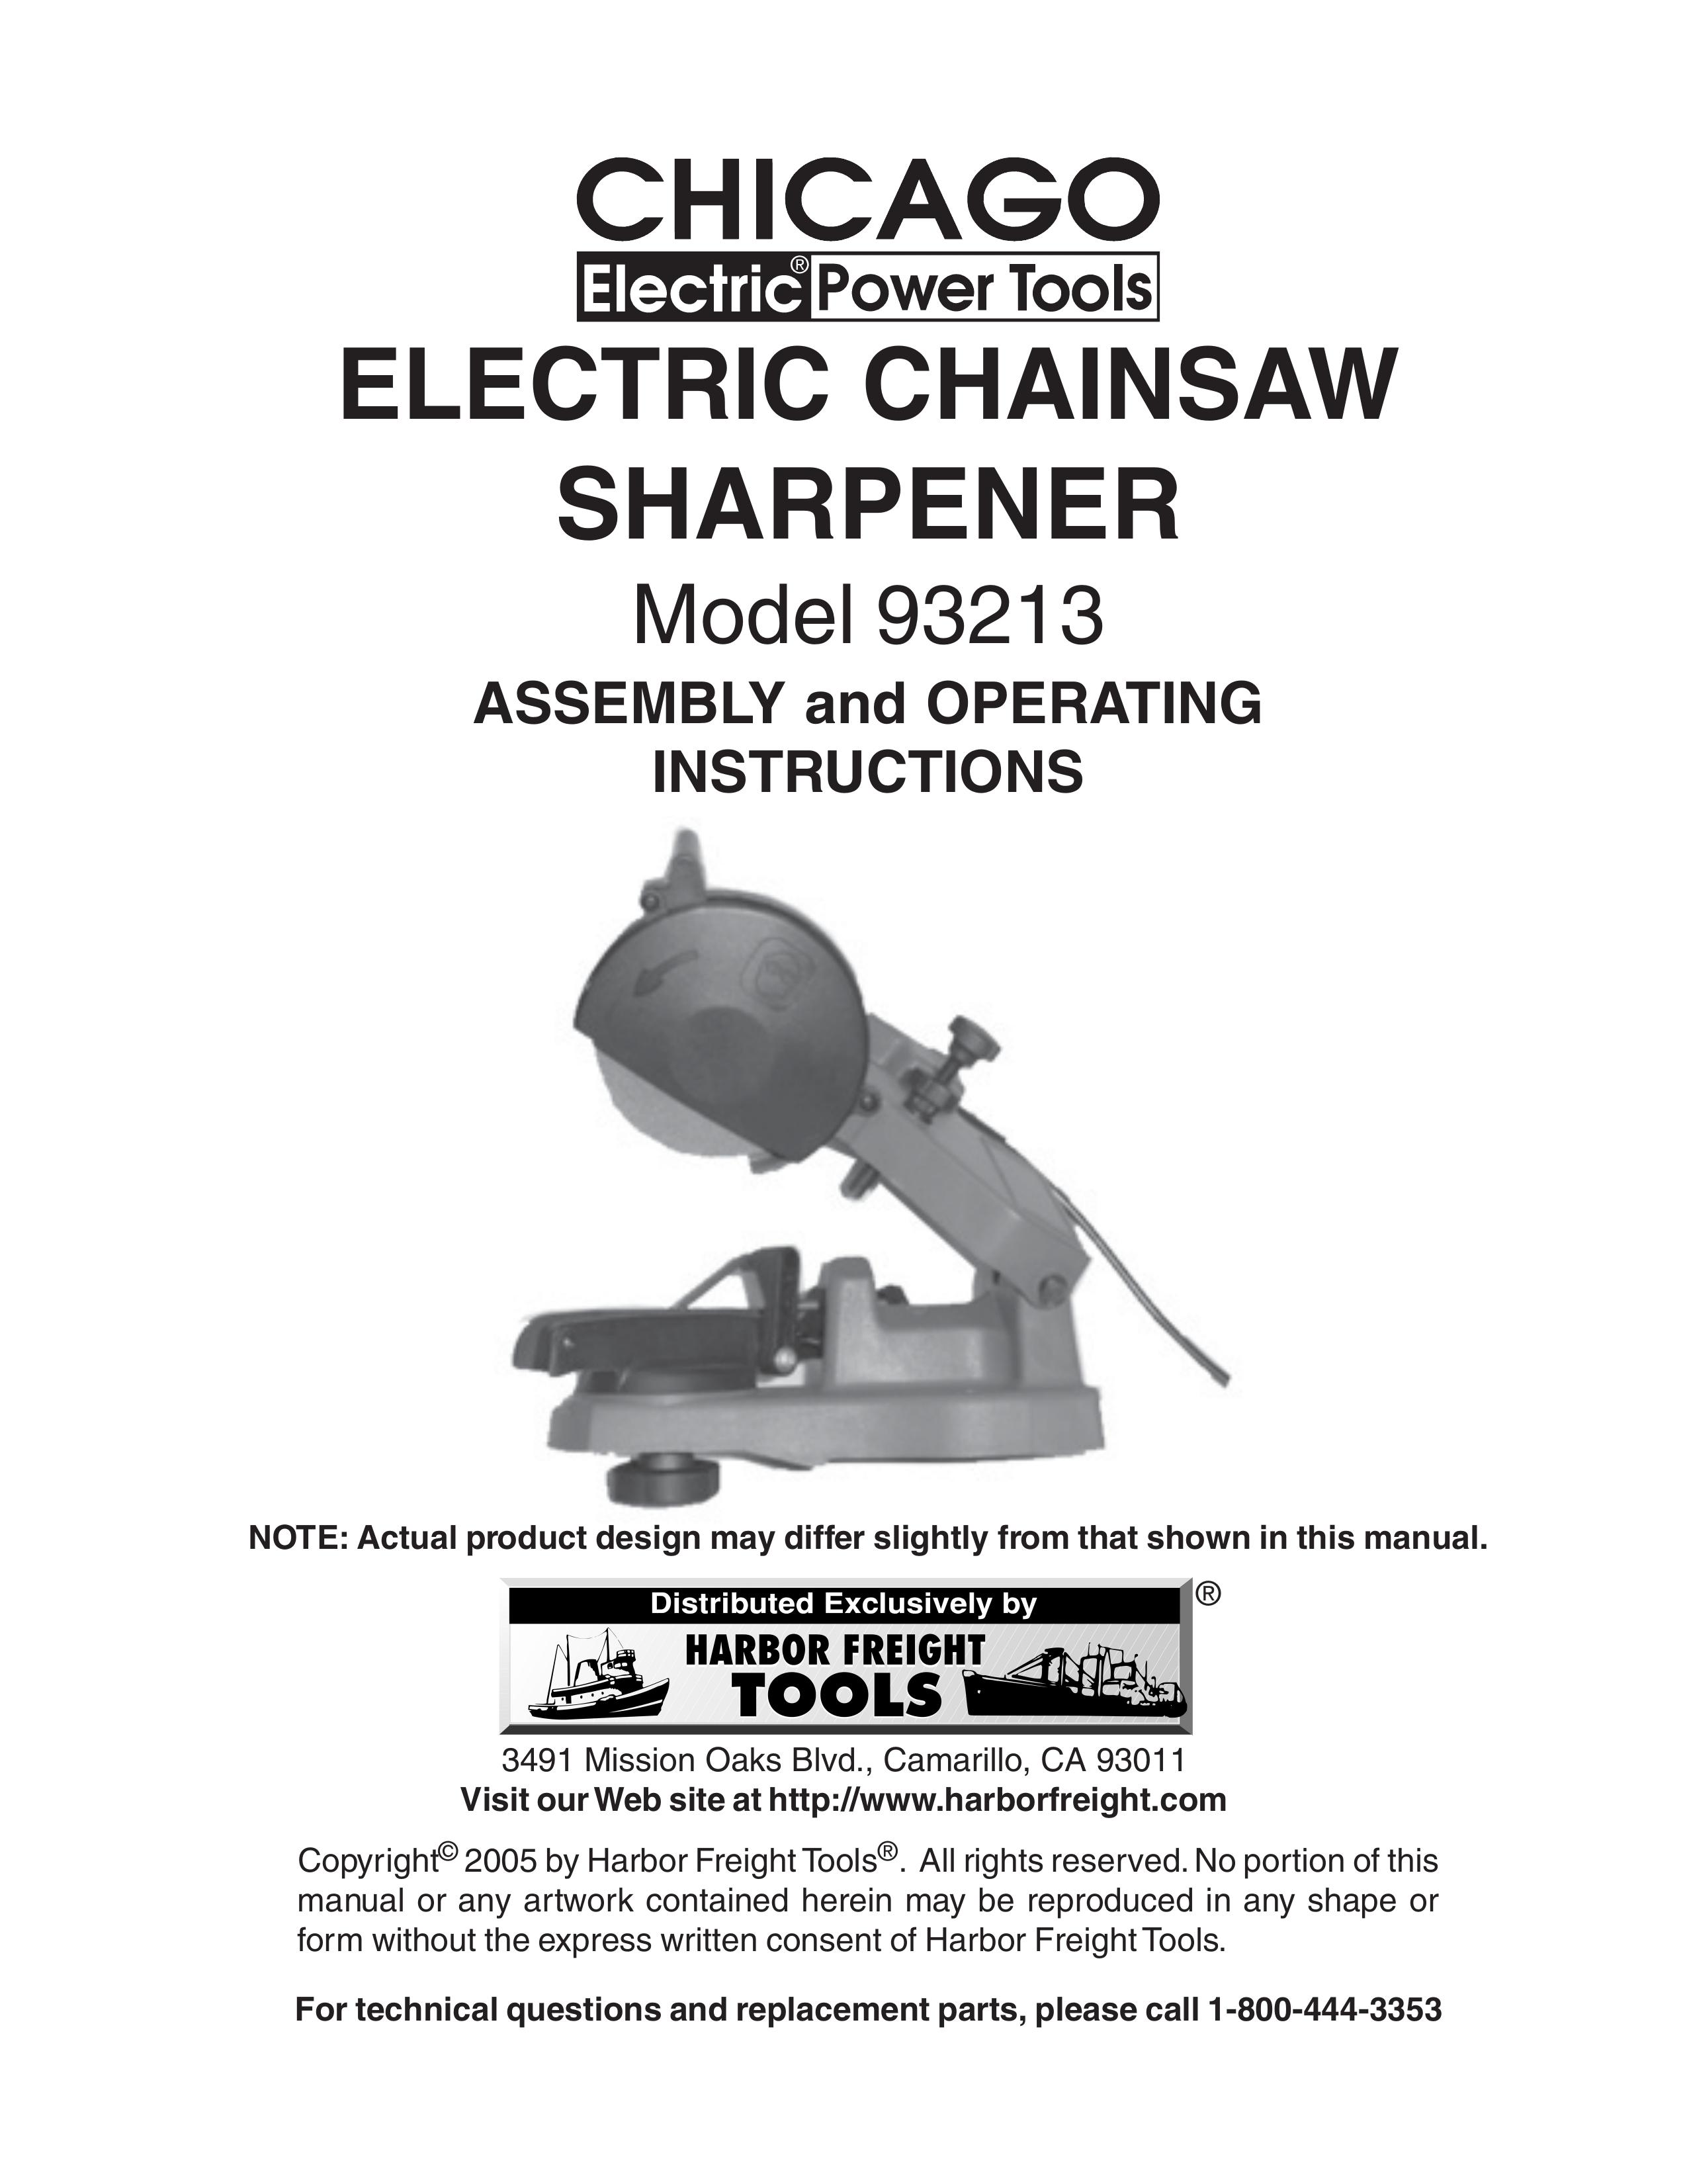 Harbor Freight Tools 93213 Chainsaw Sharpener User Manual